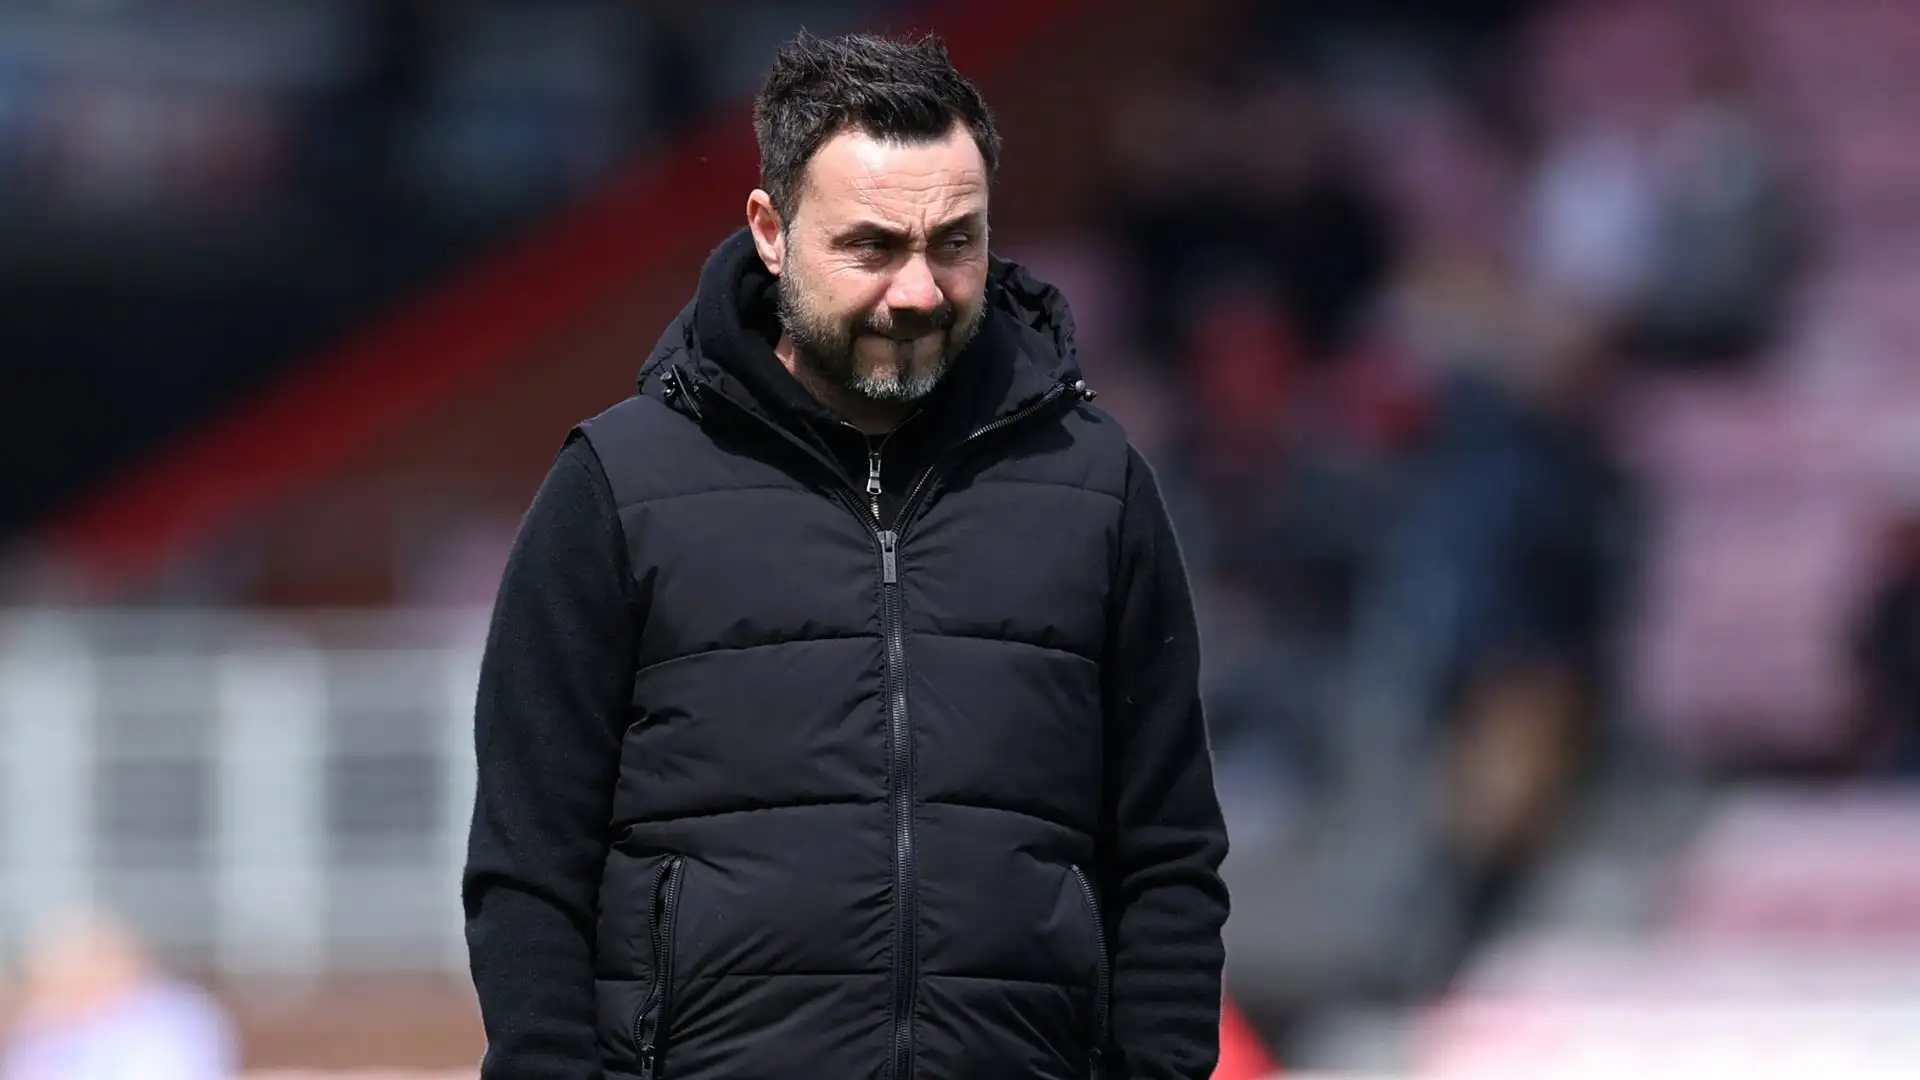 'What have you won?!' - Roberto De Zerbi labelled a 'third tier' coach as Fabio Capello says Brighton boss is only highly rated because of Pep Guardiola